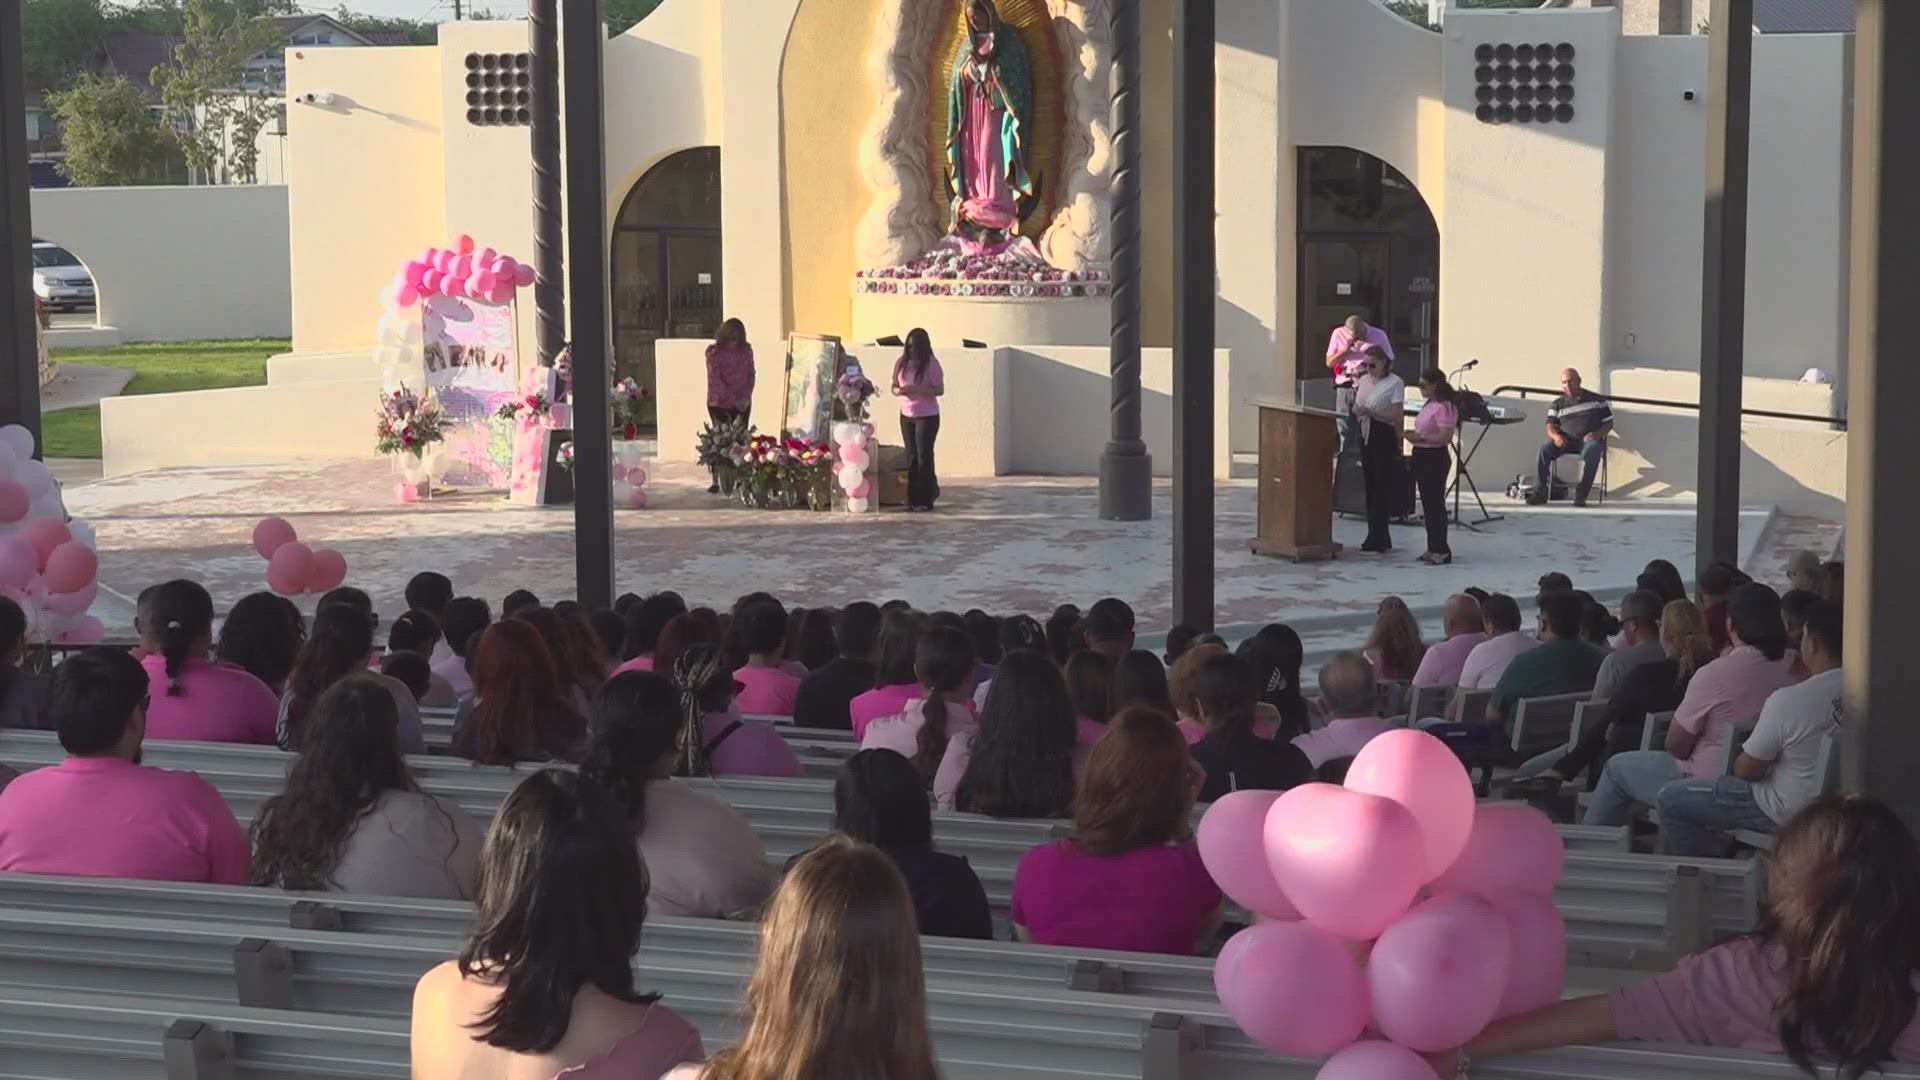 Loved ones gathered to pray and place flowers near a memorial for Madeline. A balloon release concluded the ceremony that was held to represent the person she was.